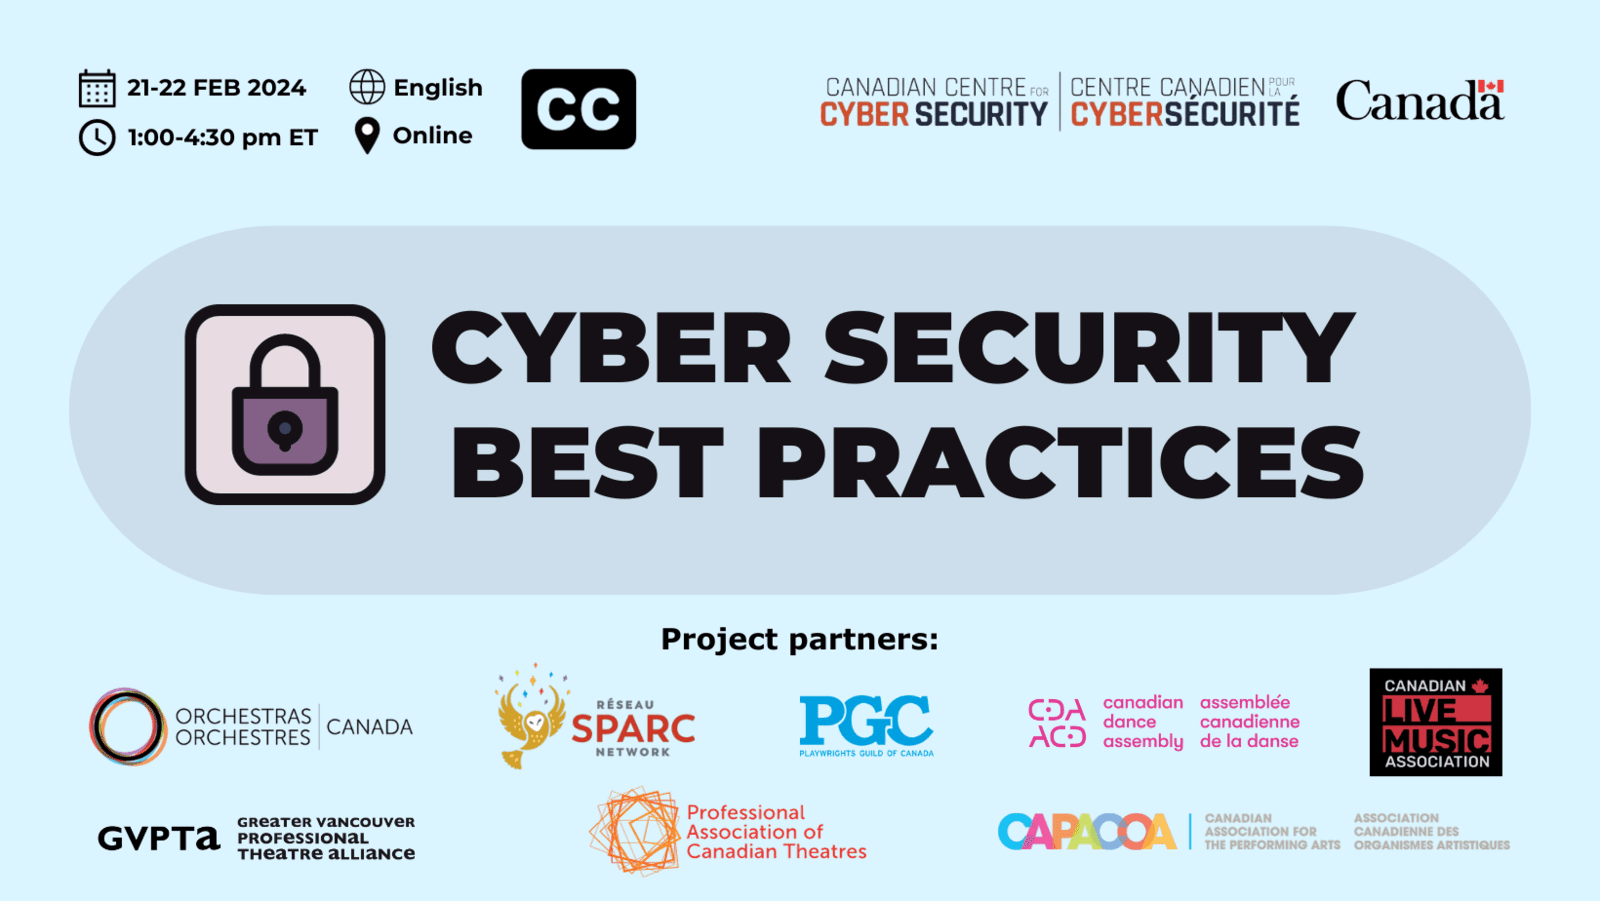 Image of a promotional graphic for an upcoming Cyber Security Best Practices training. The text and logos on the image announce a partnership among eight arts service organizations in Canada. Details about the event, including dates (Feb 21 & 22, 2024), time (1:00-4:30 pm ET), and language (English), are highlighted.